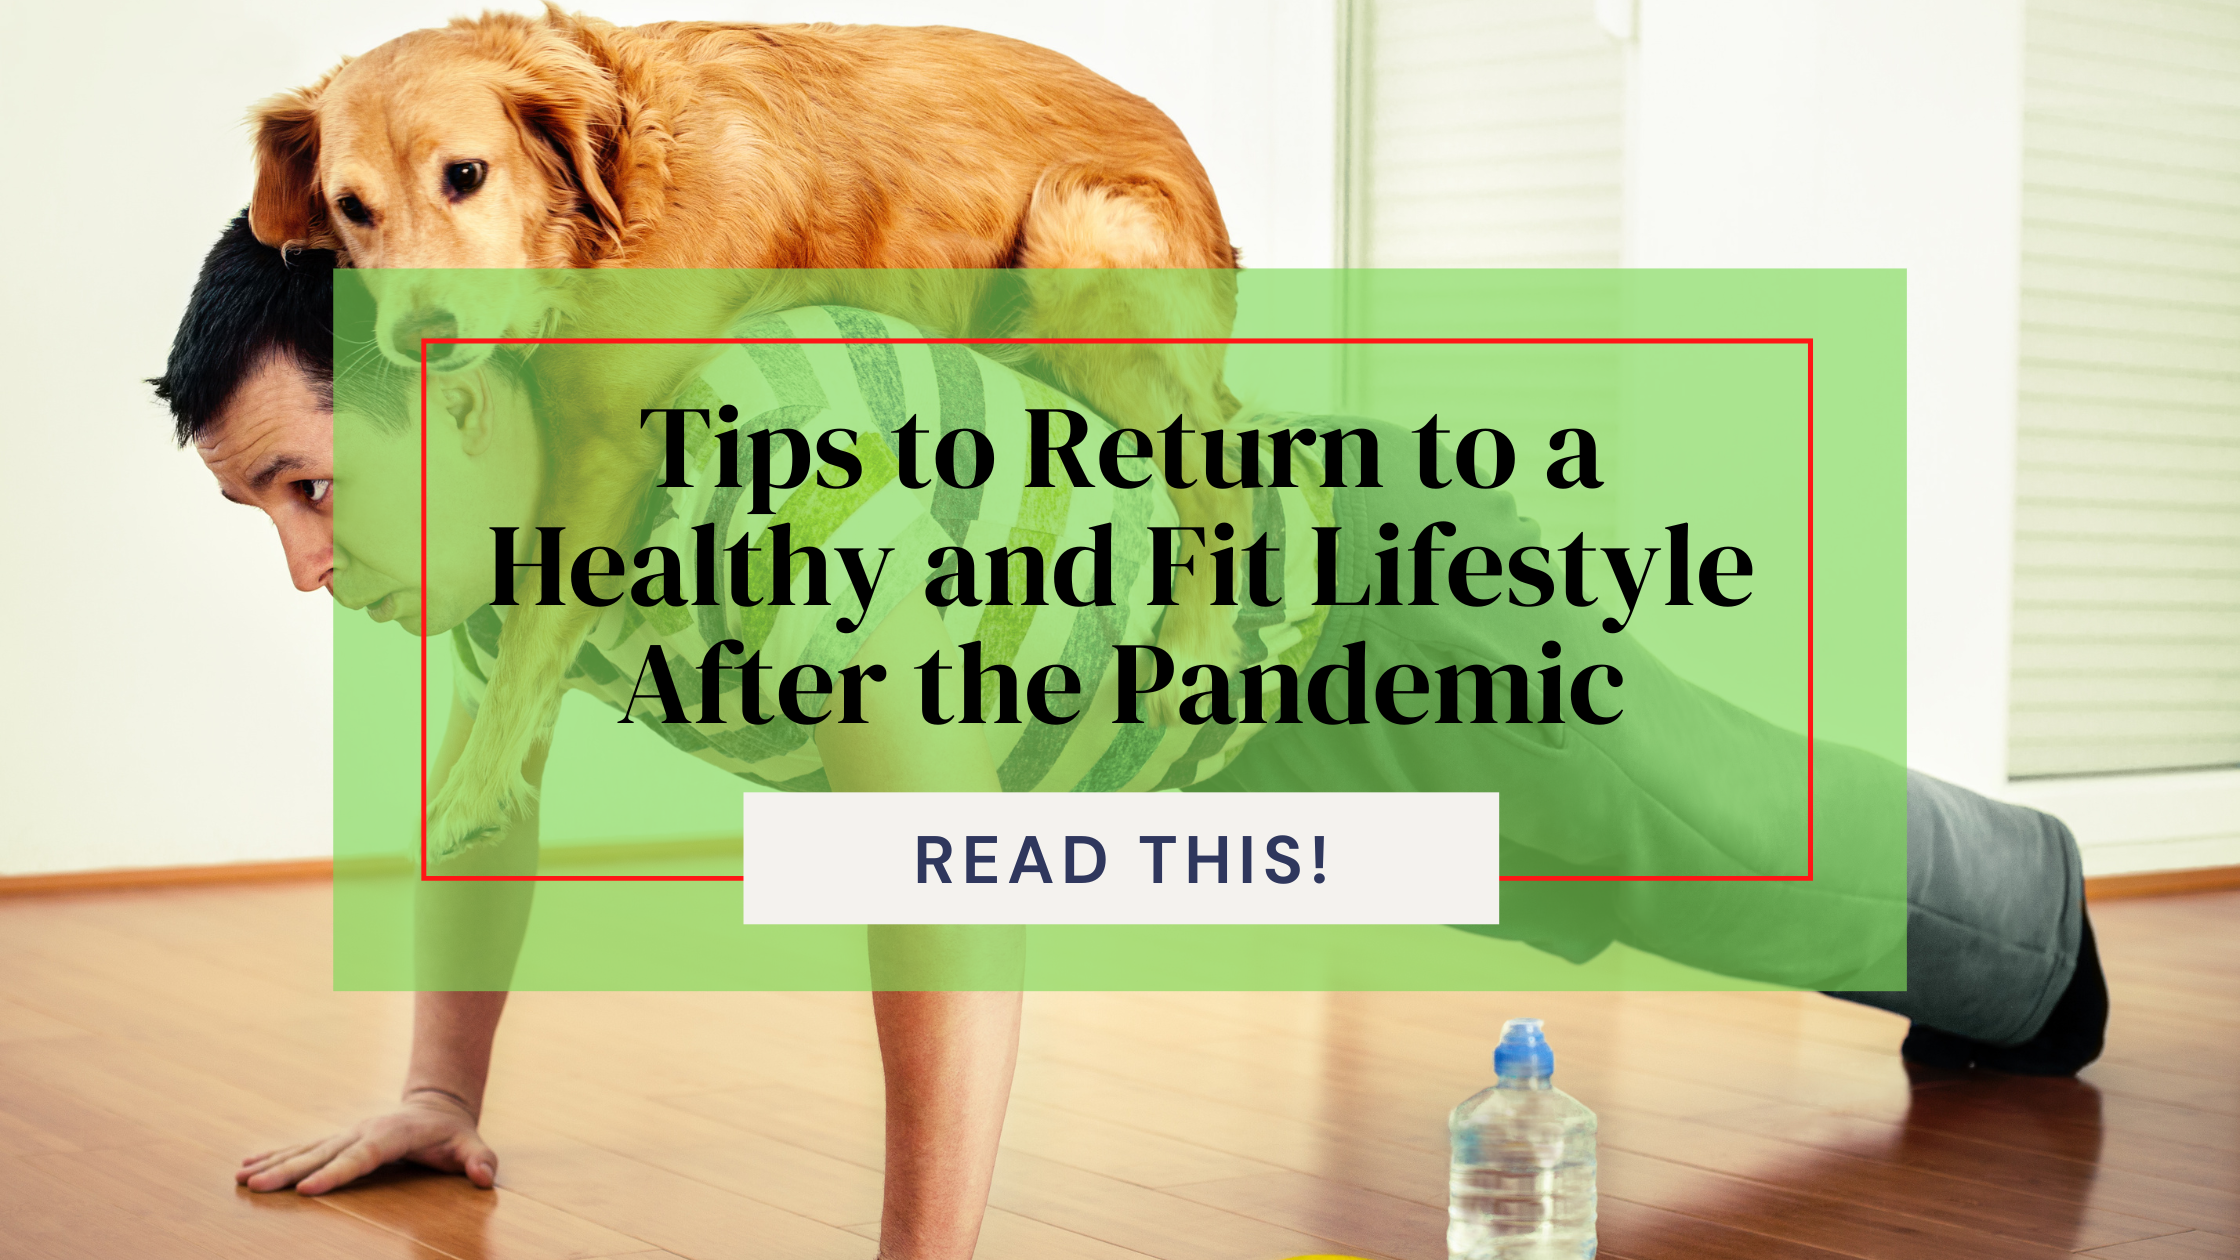 Tips to Return to a Healthy and Fit Lifestyle After the Pandemic